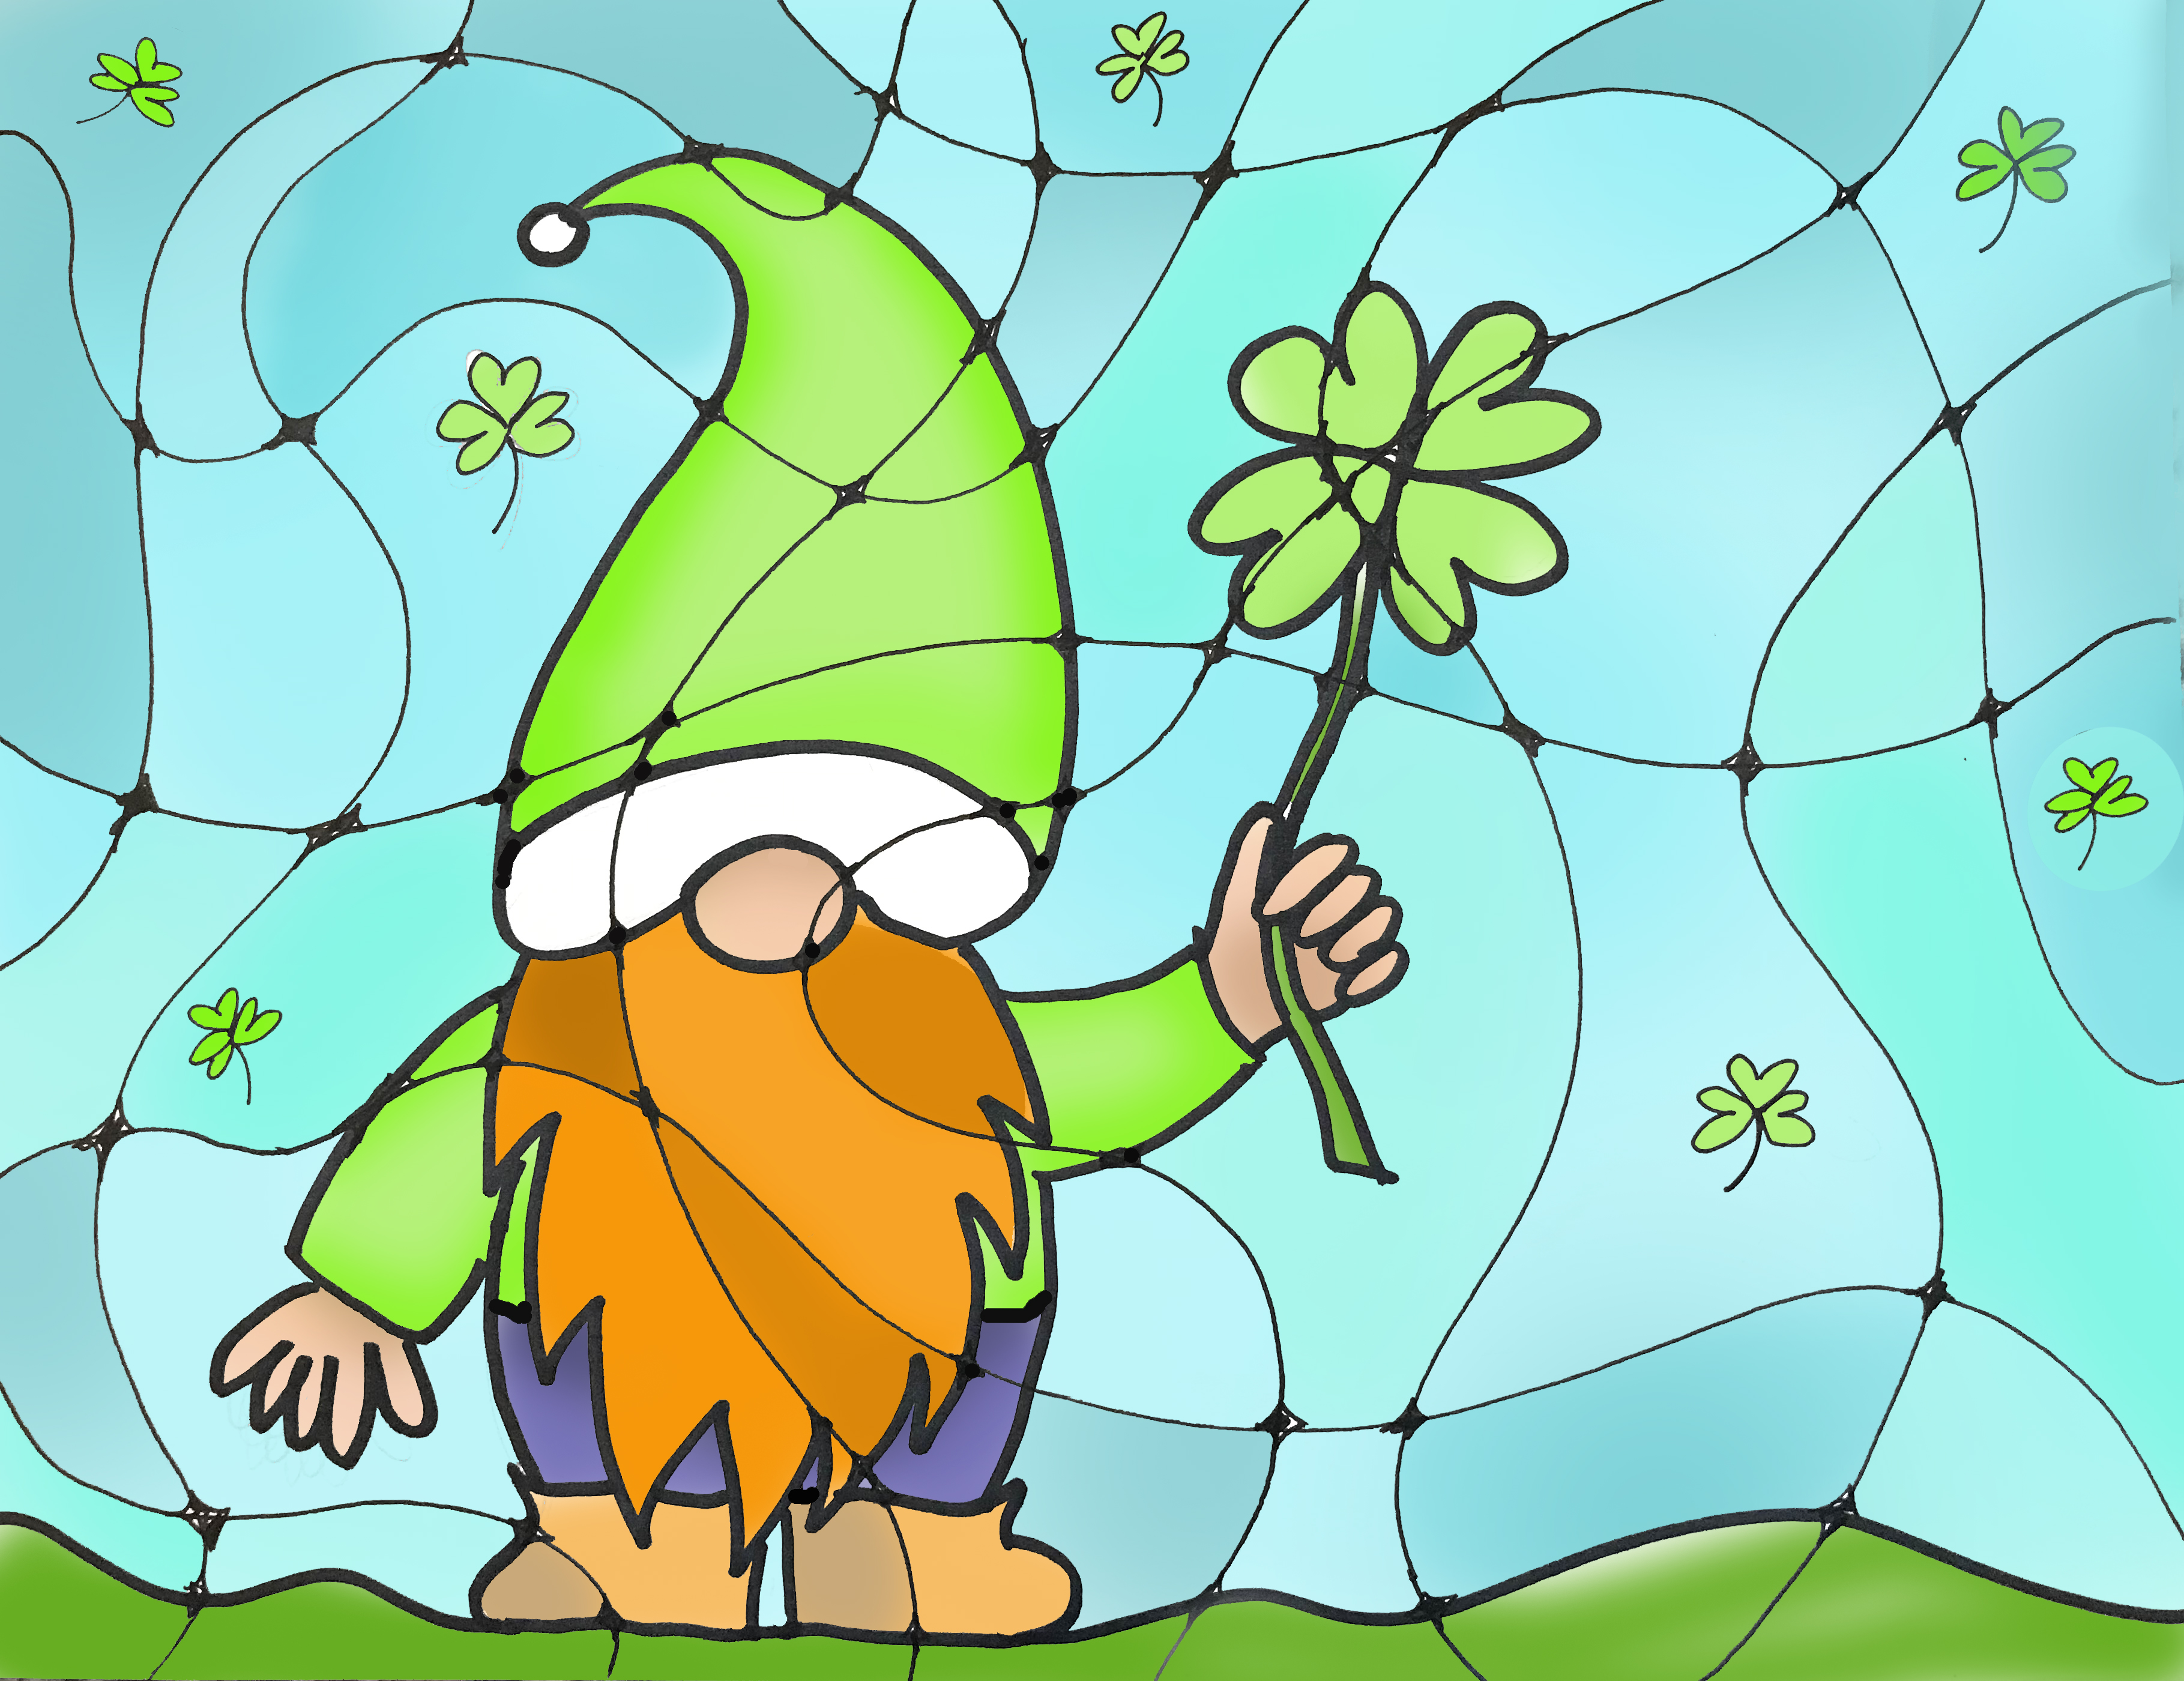 stained glass-esque watercolor gnome in shades of green